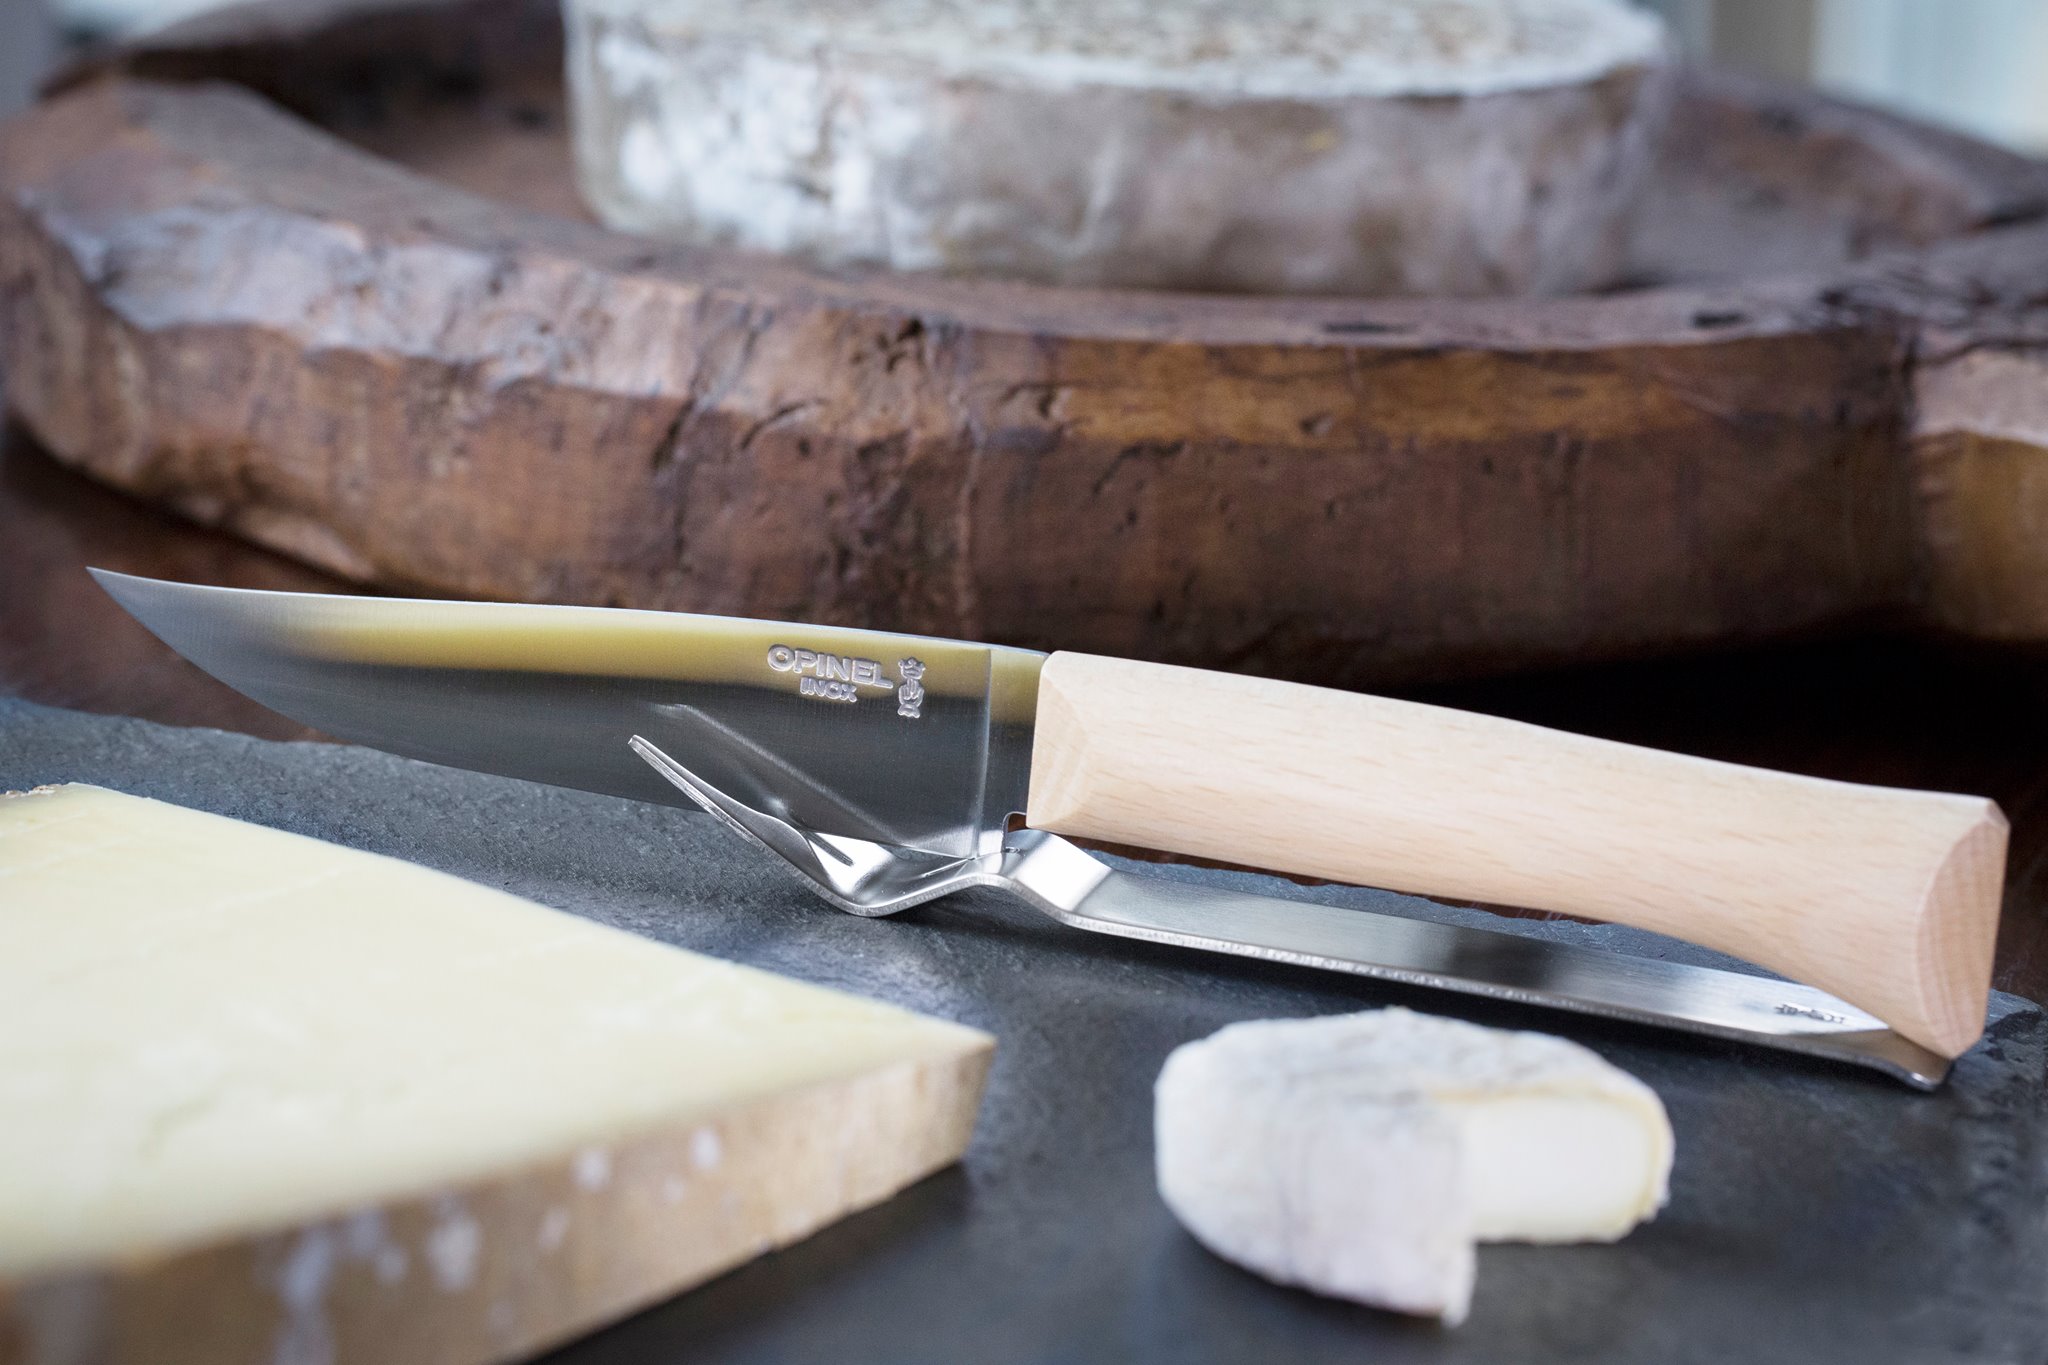 Opinel et fromages